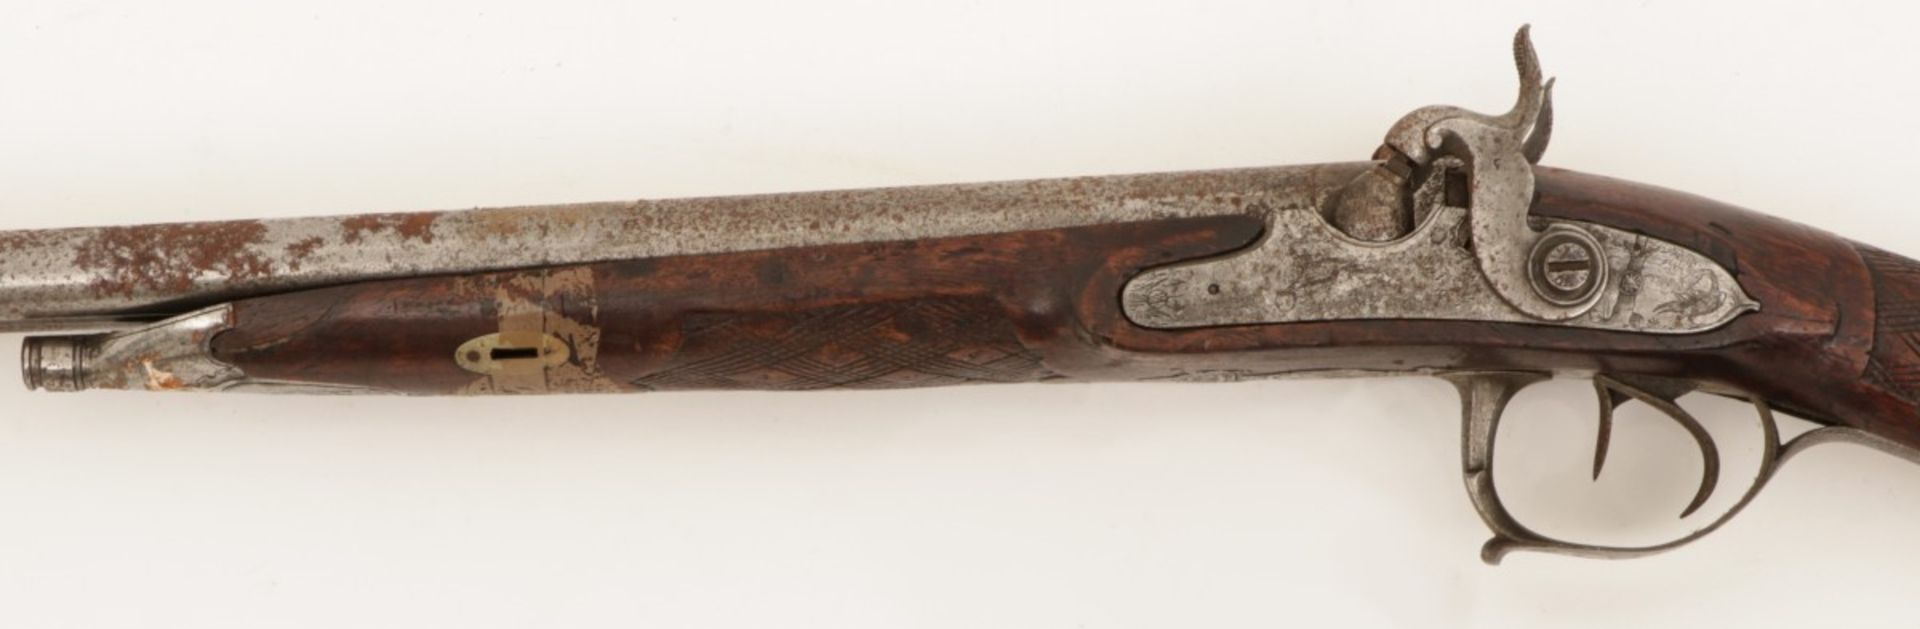 A double barrel percussion rifle, France, late 19th century. - Image 3 of 4